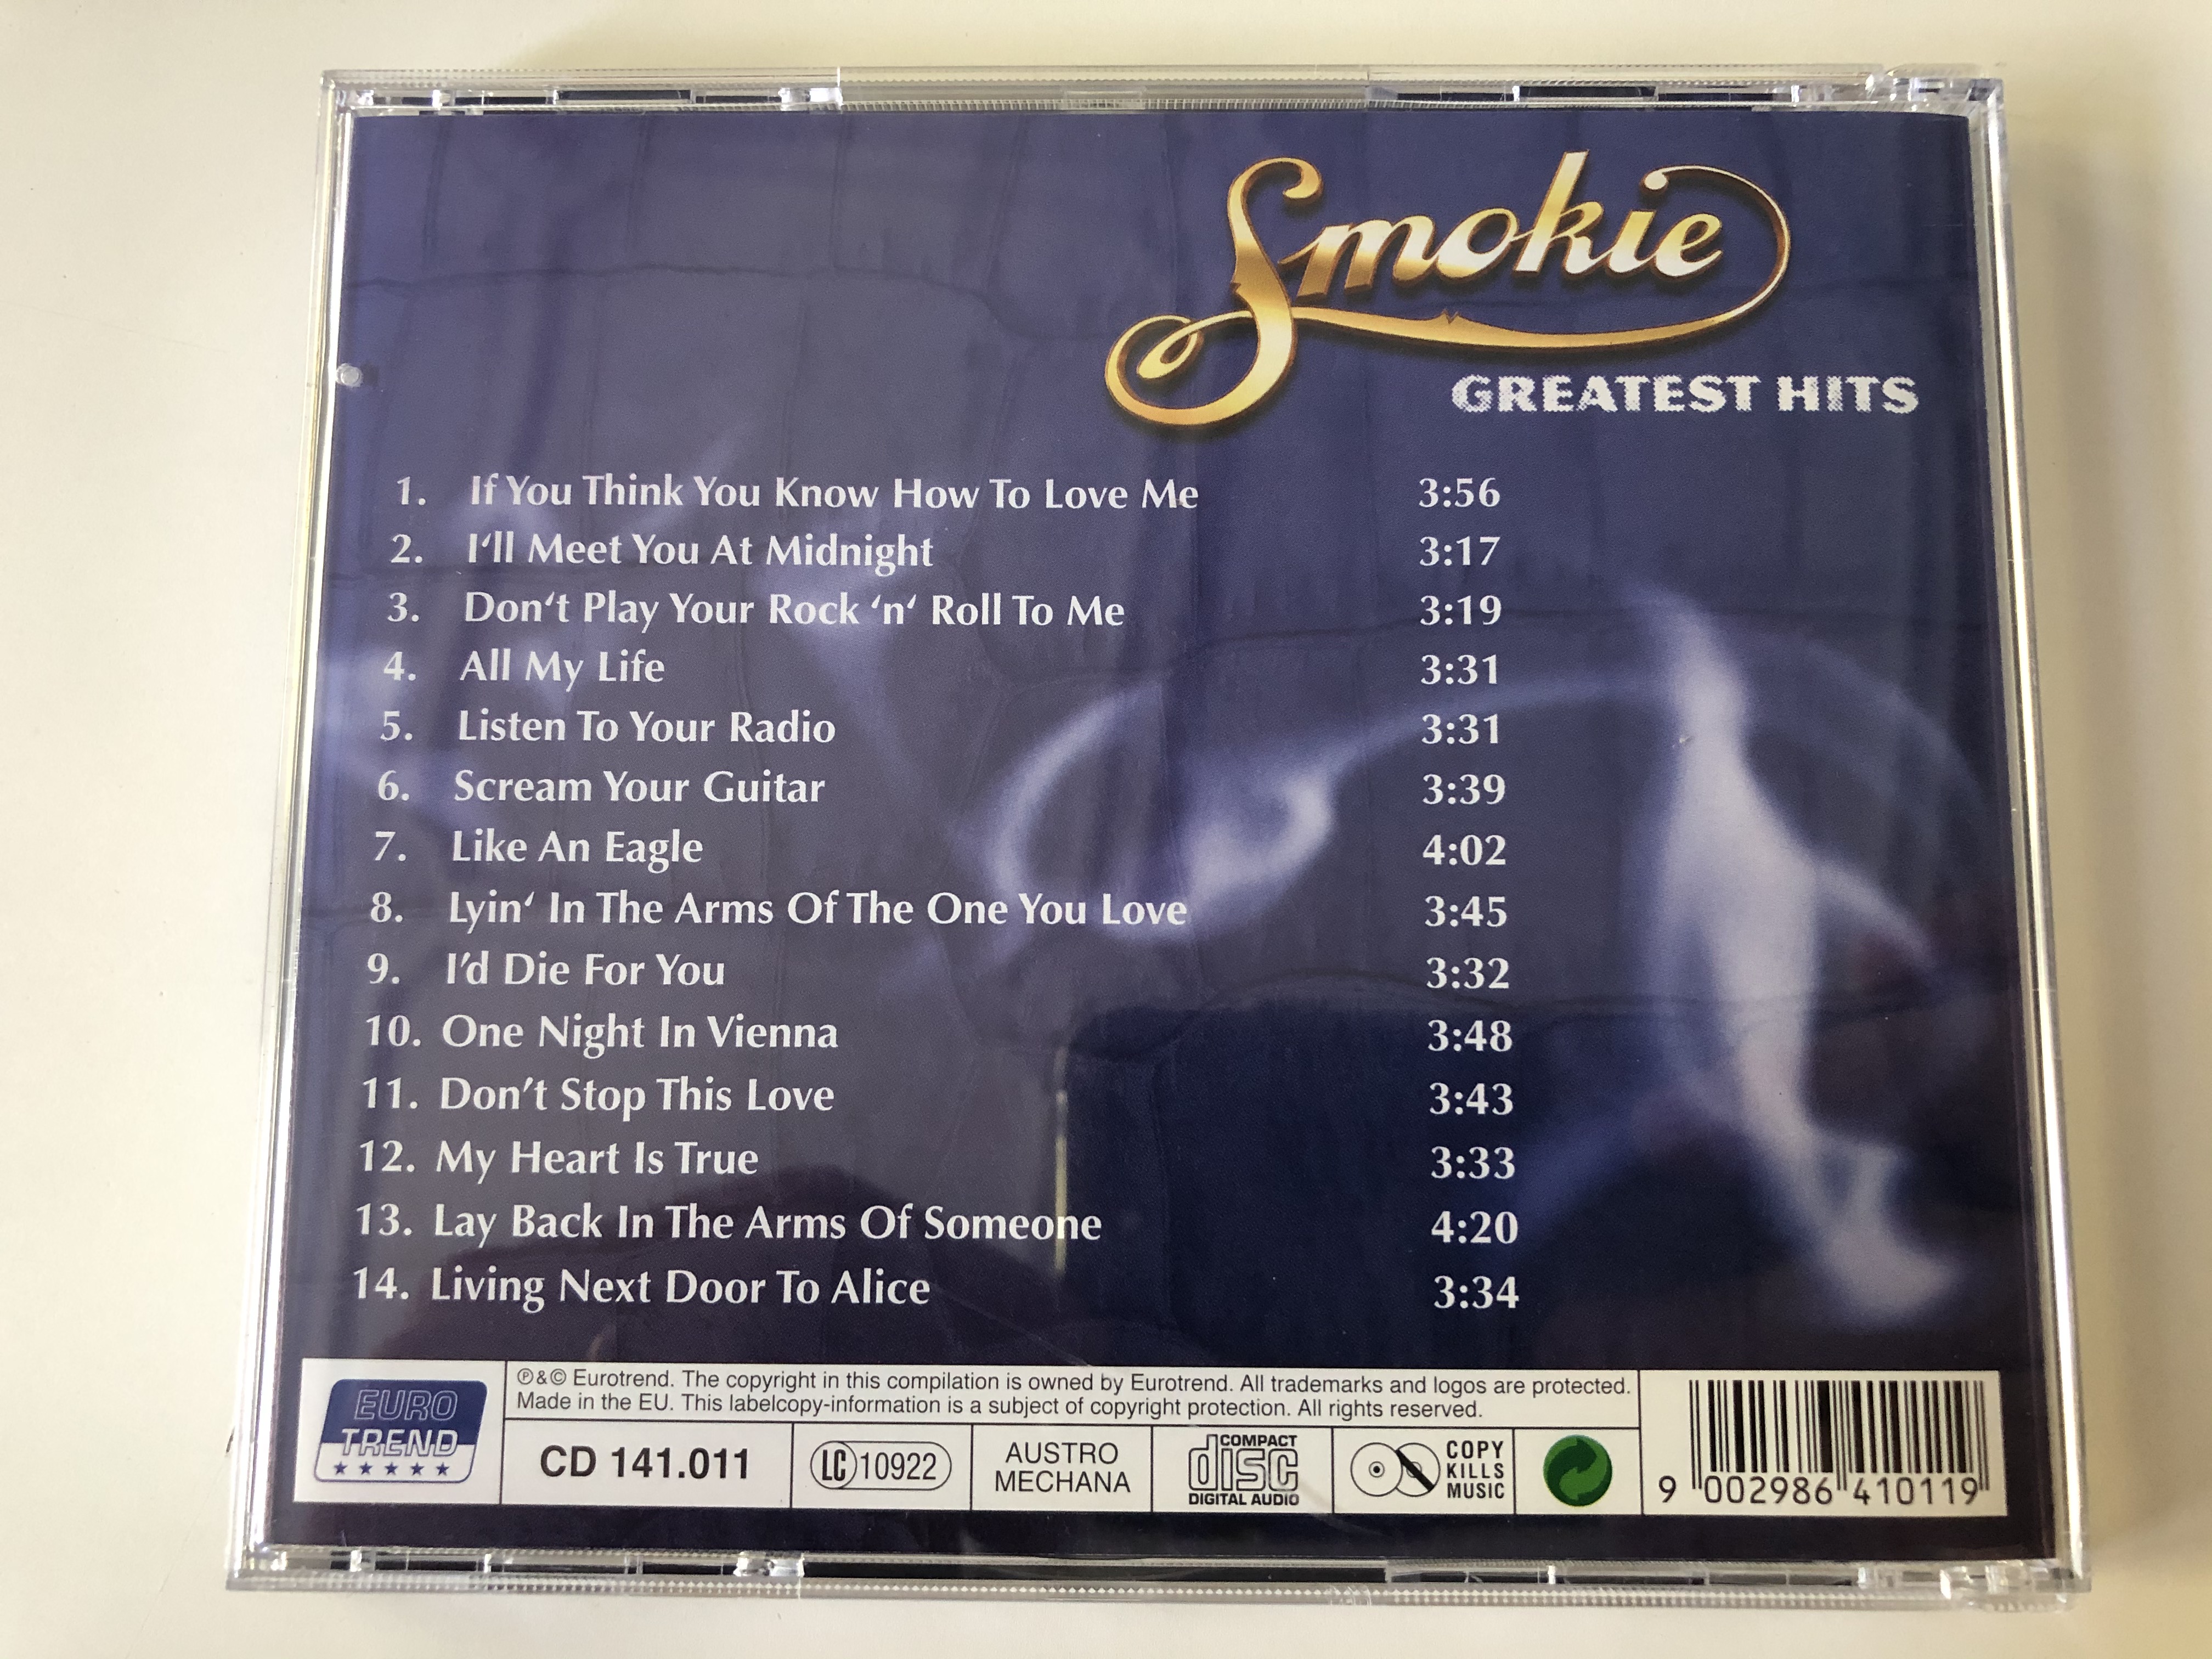 smokie-greatest-hits-cd-1-if-you-think-you-know-how-to-love-me-i-ll-meet-you-at-midnight-don-t-play-your-rock-n-roll-to-me-my-heart-is-true-a.m.o.-eurotrend-audio-cd-cd-141-4-.jpg